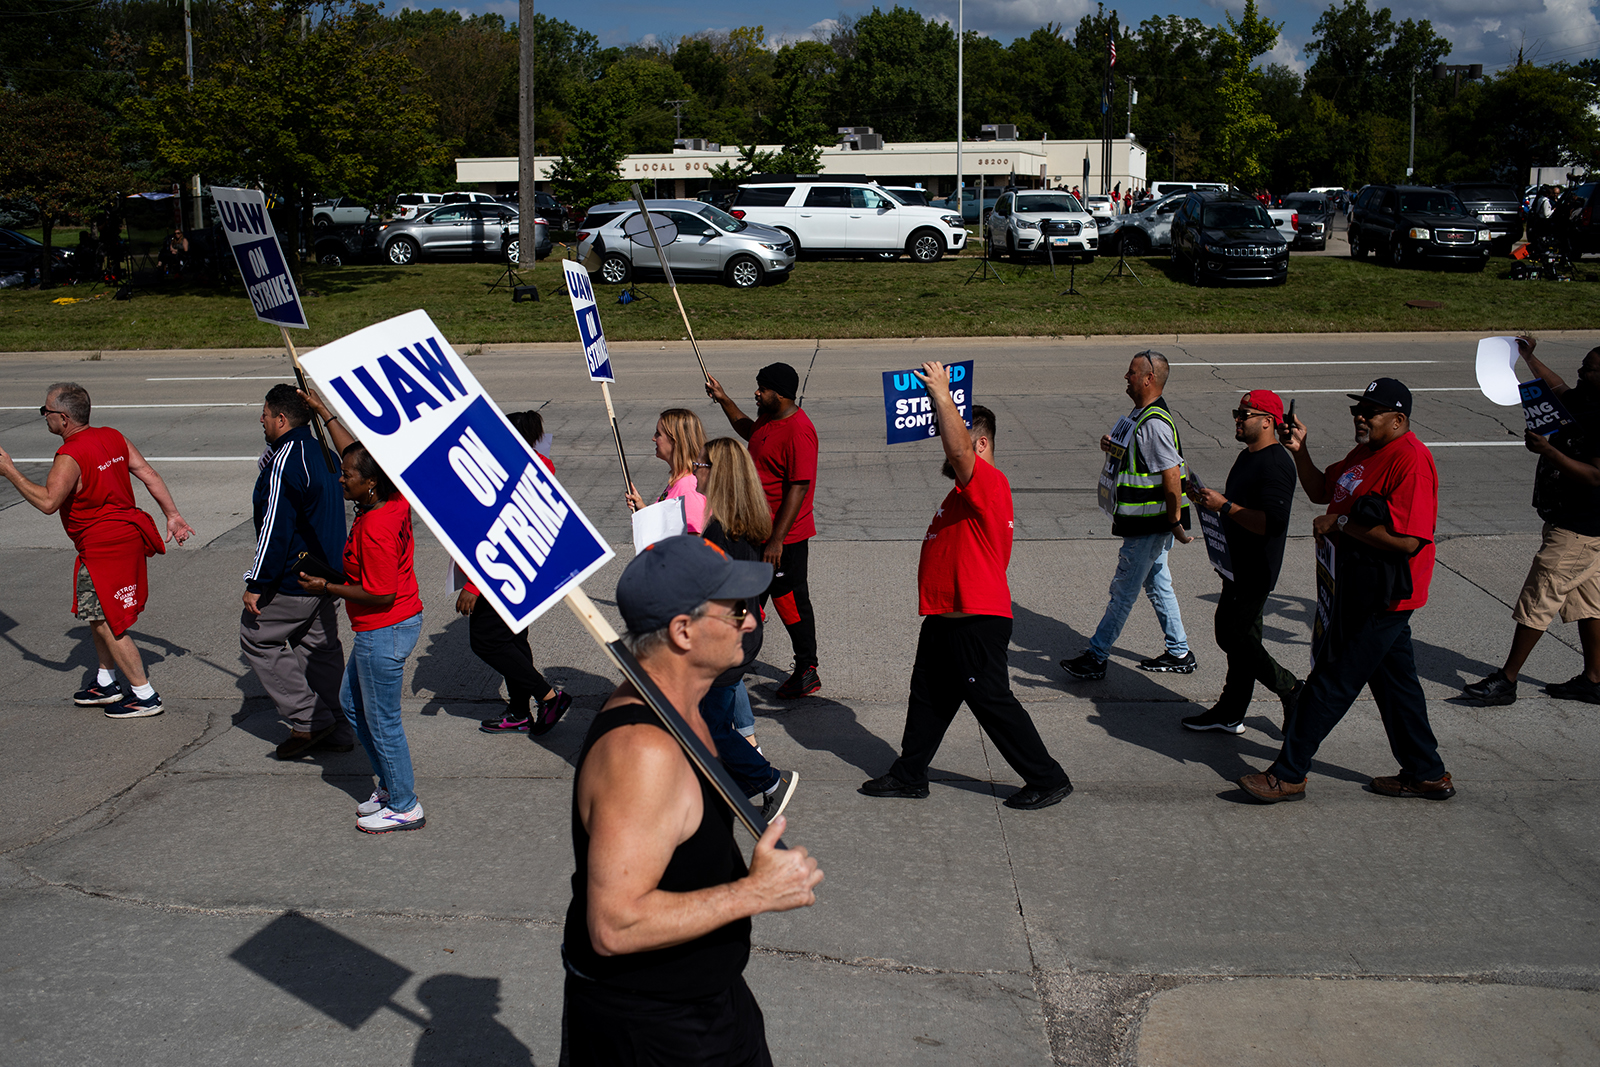 United Auto Workers (UAW) members on a picket line outside the Ford Motor Co. Michigan Assembly plant today in Wayne, Michigan.